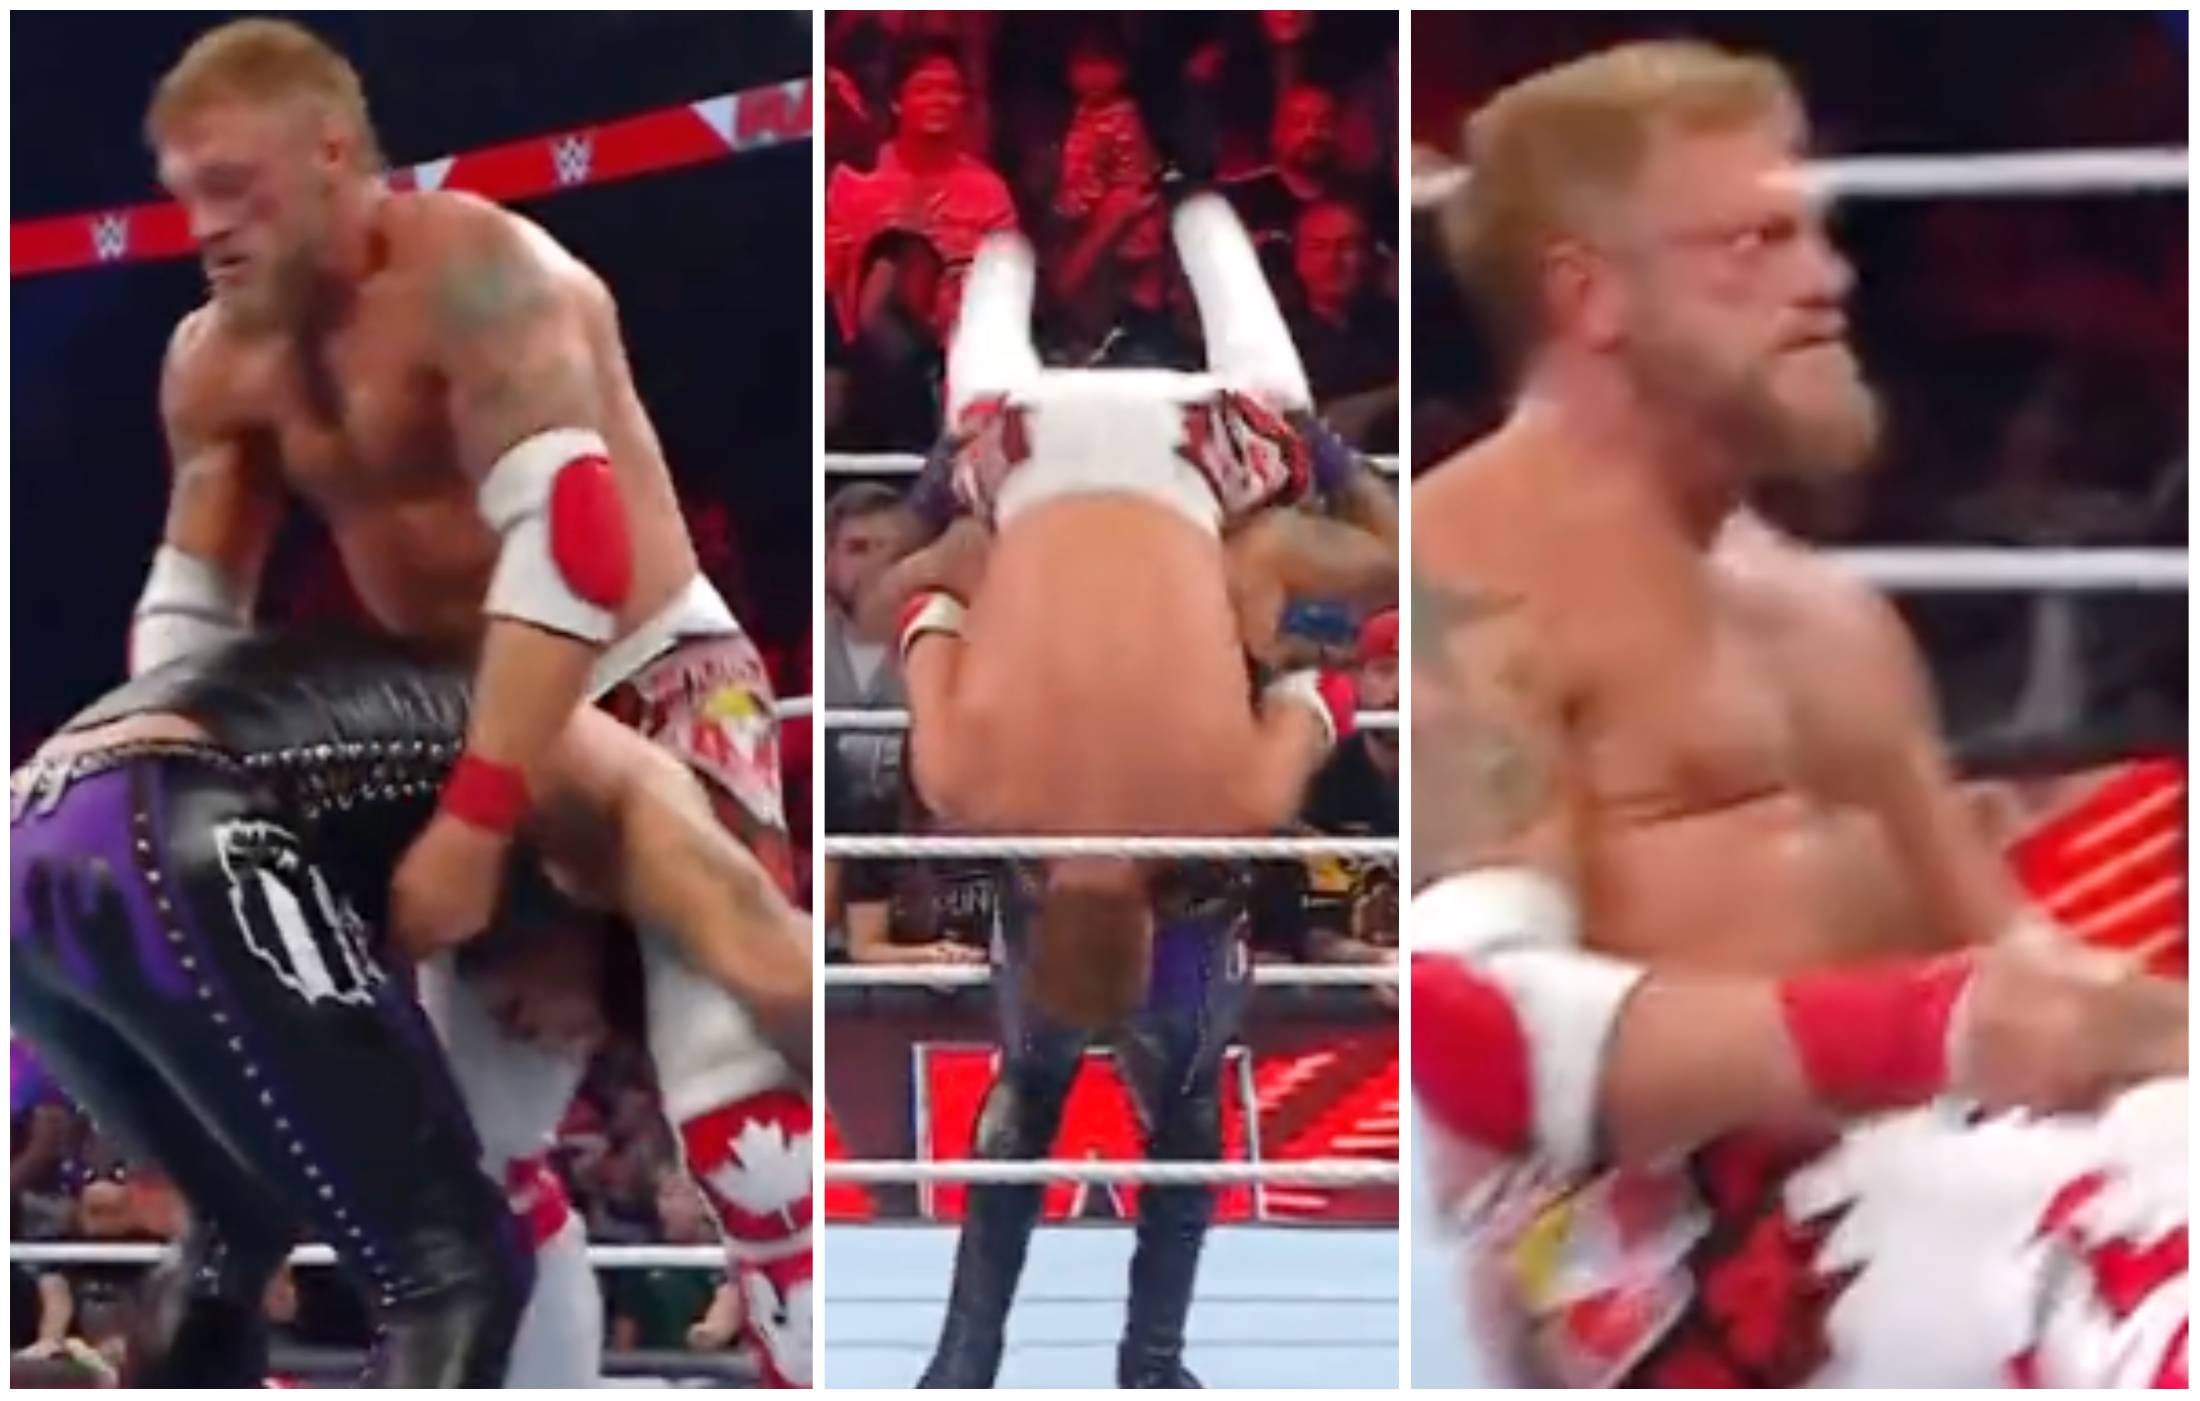 Edge hit an insane Canadian Destroyer on WWE Raw